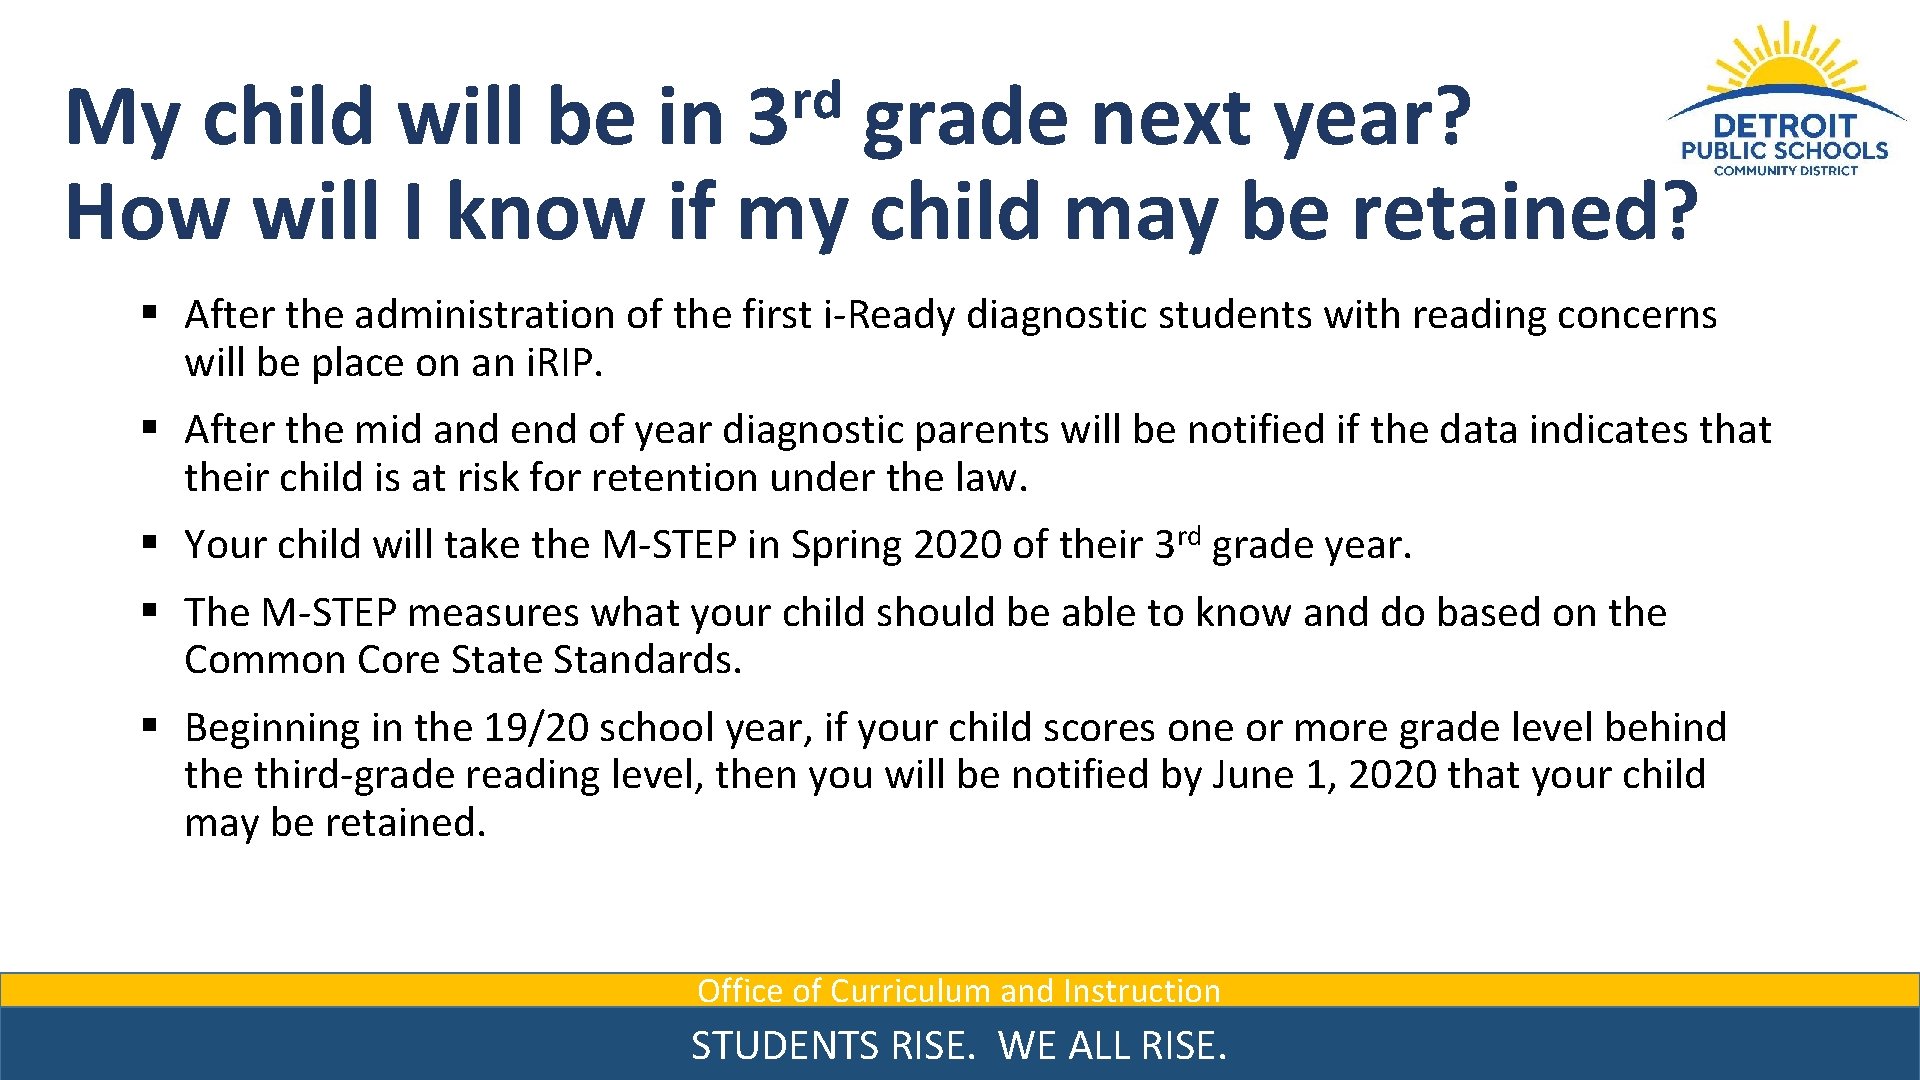 rd 3 My child will be in grade next year? How will I know